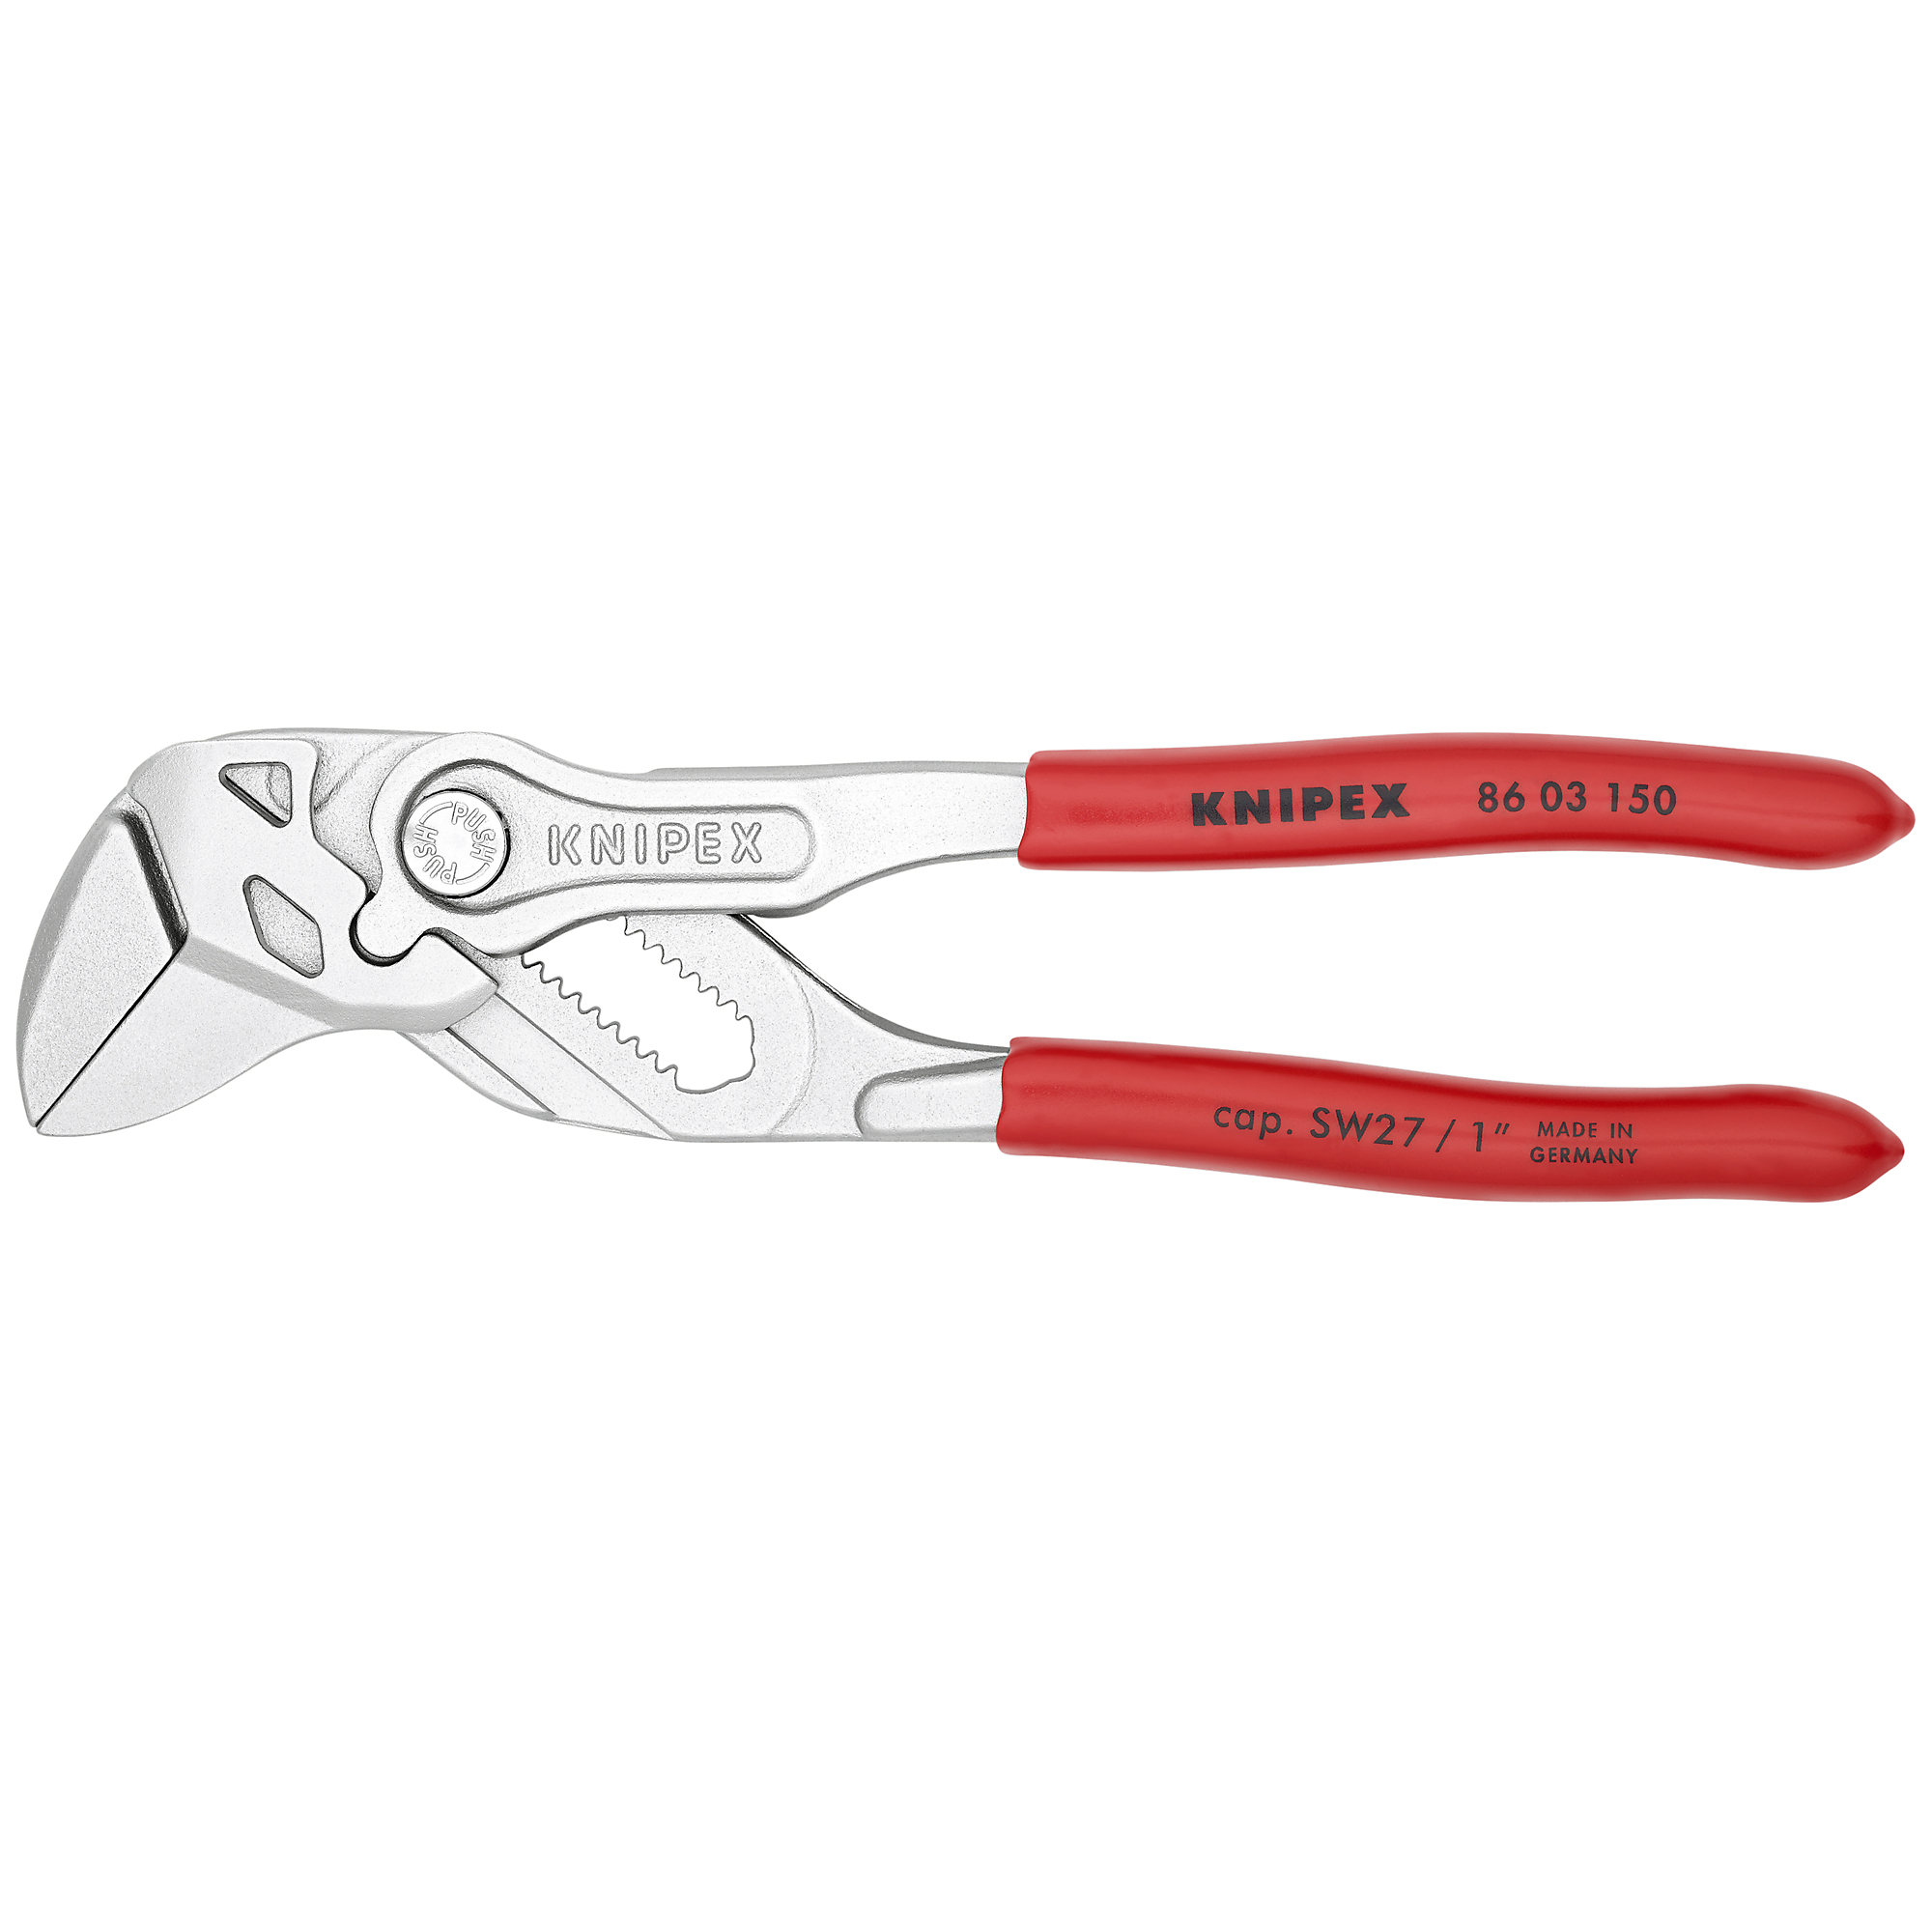 KNIPEX, Pliers Wrench, Plastic coating, Bulk, 6Inch, Pieces (qty.) 1 Material Steel, Jaw Capacity 1 in, Model 86 03 150